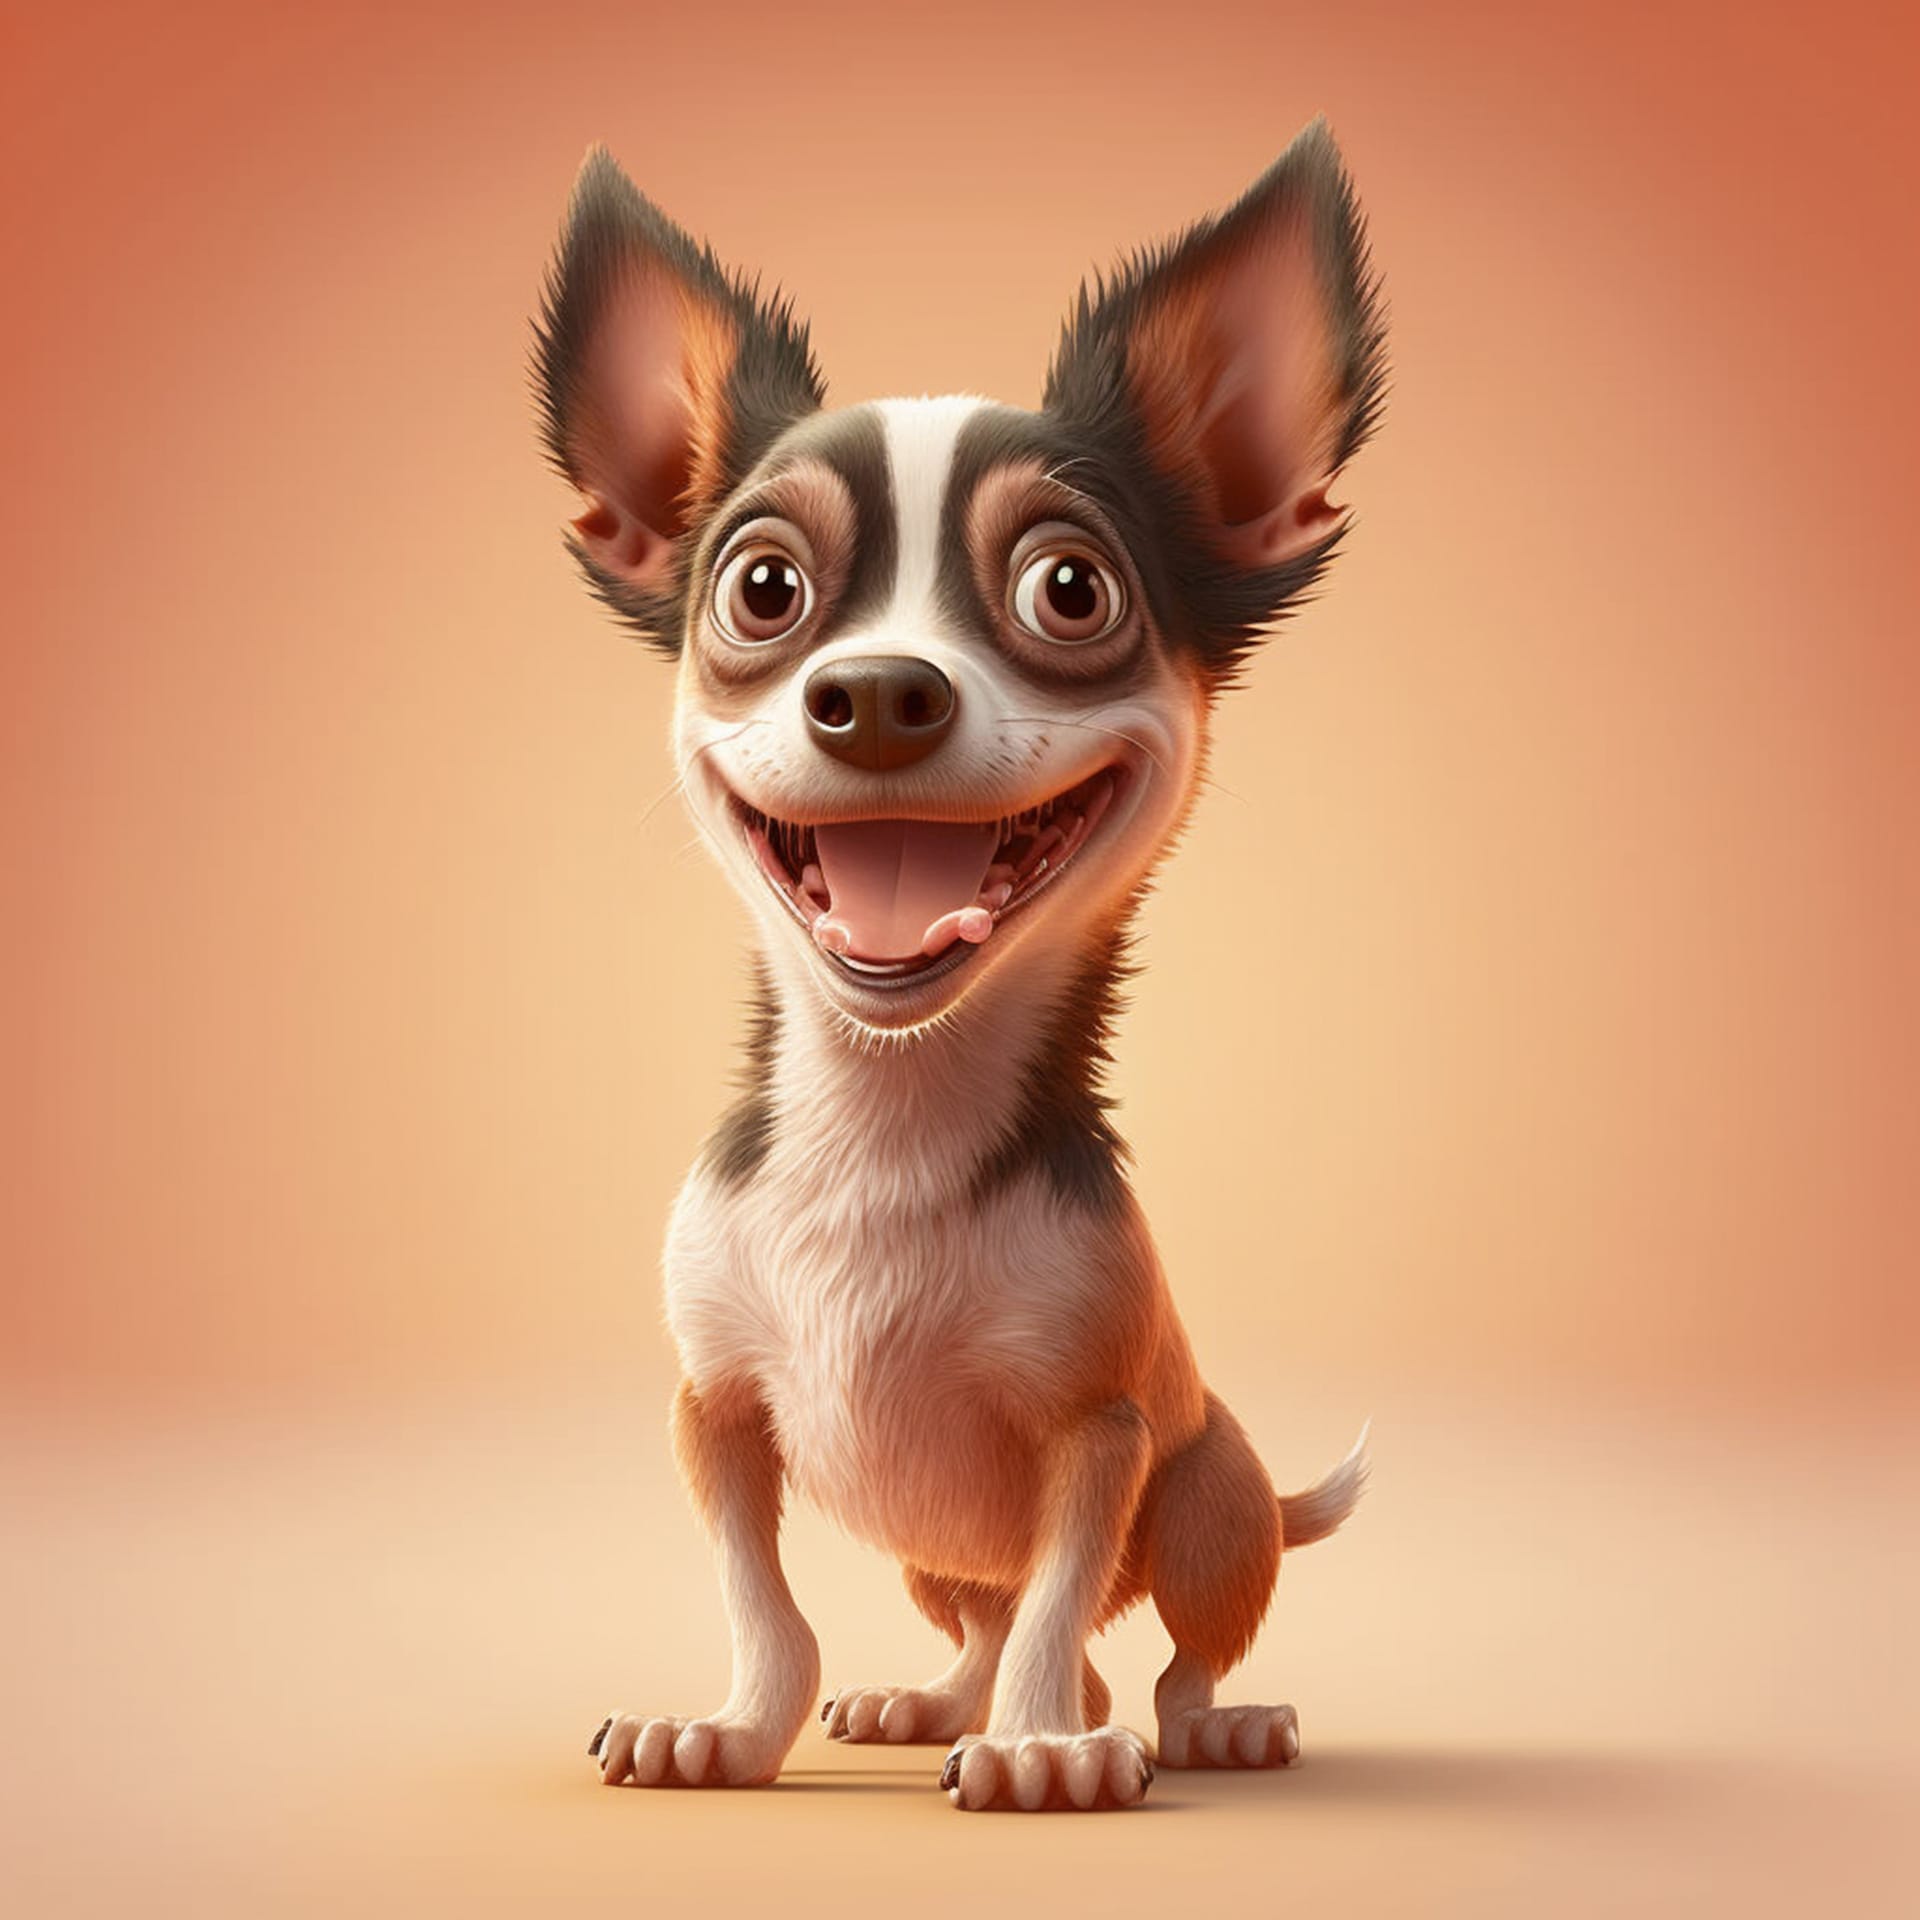 Happy little dog isolated peach background rendering